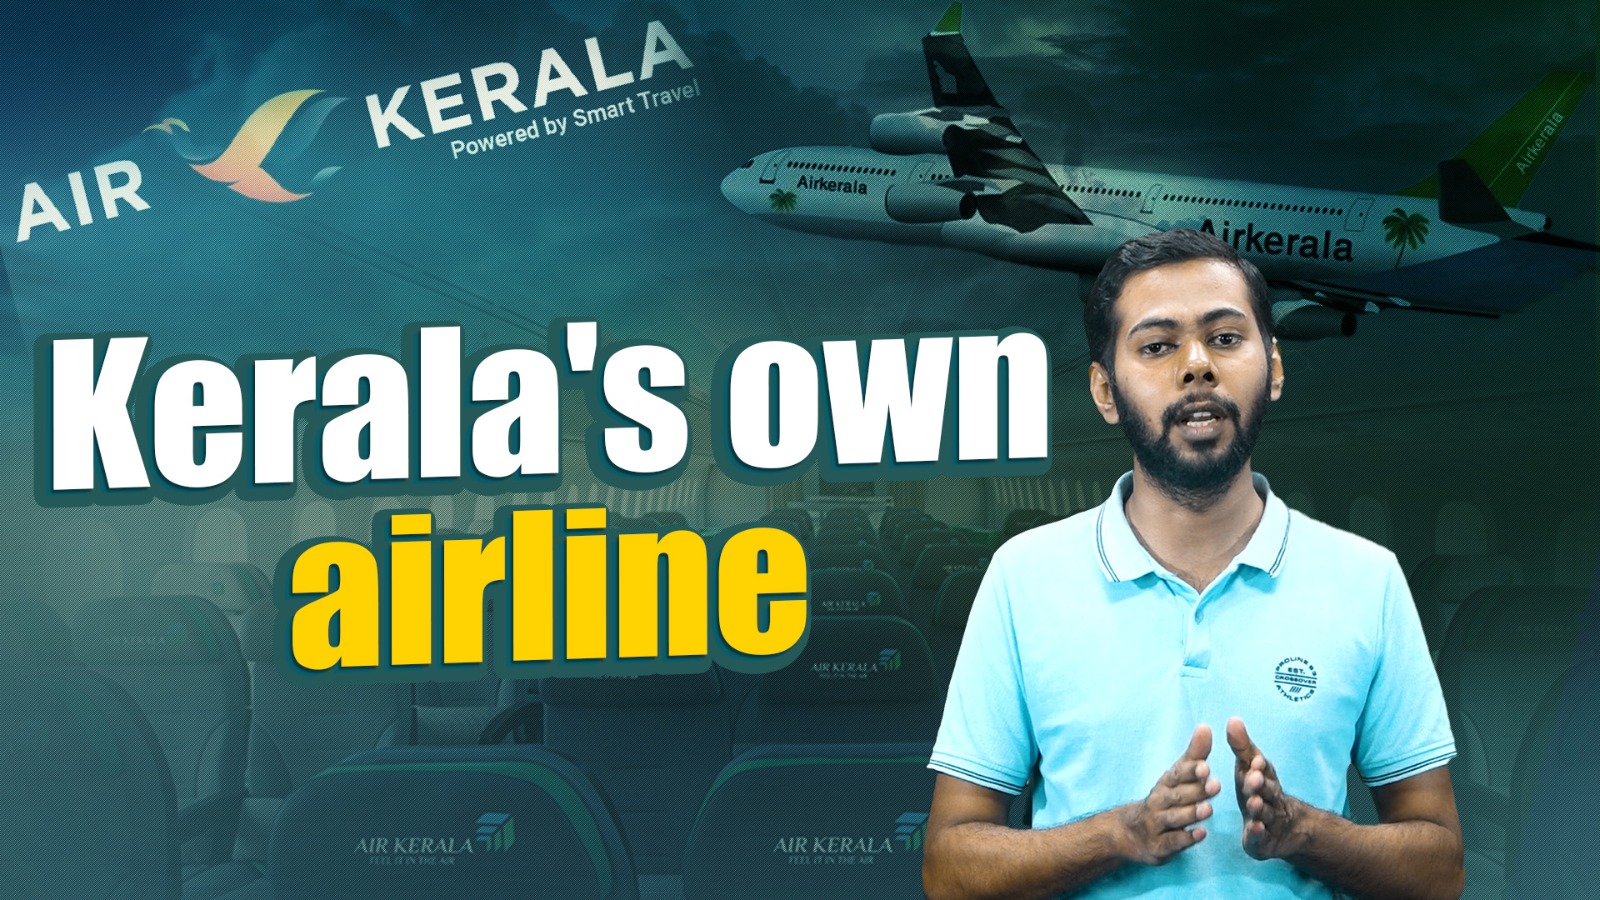 All you need to know about Kerala's own airline, Air Kerala